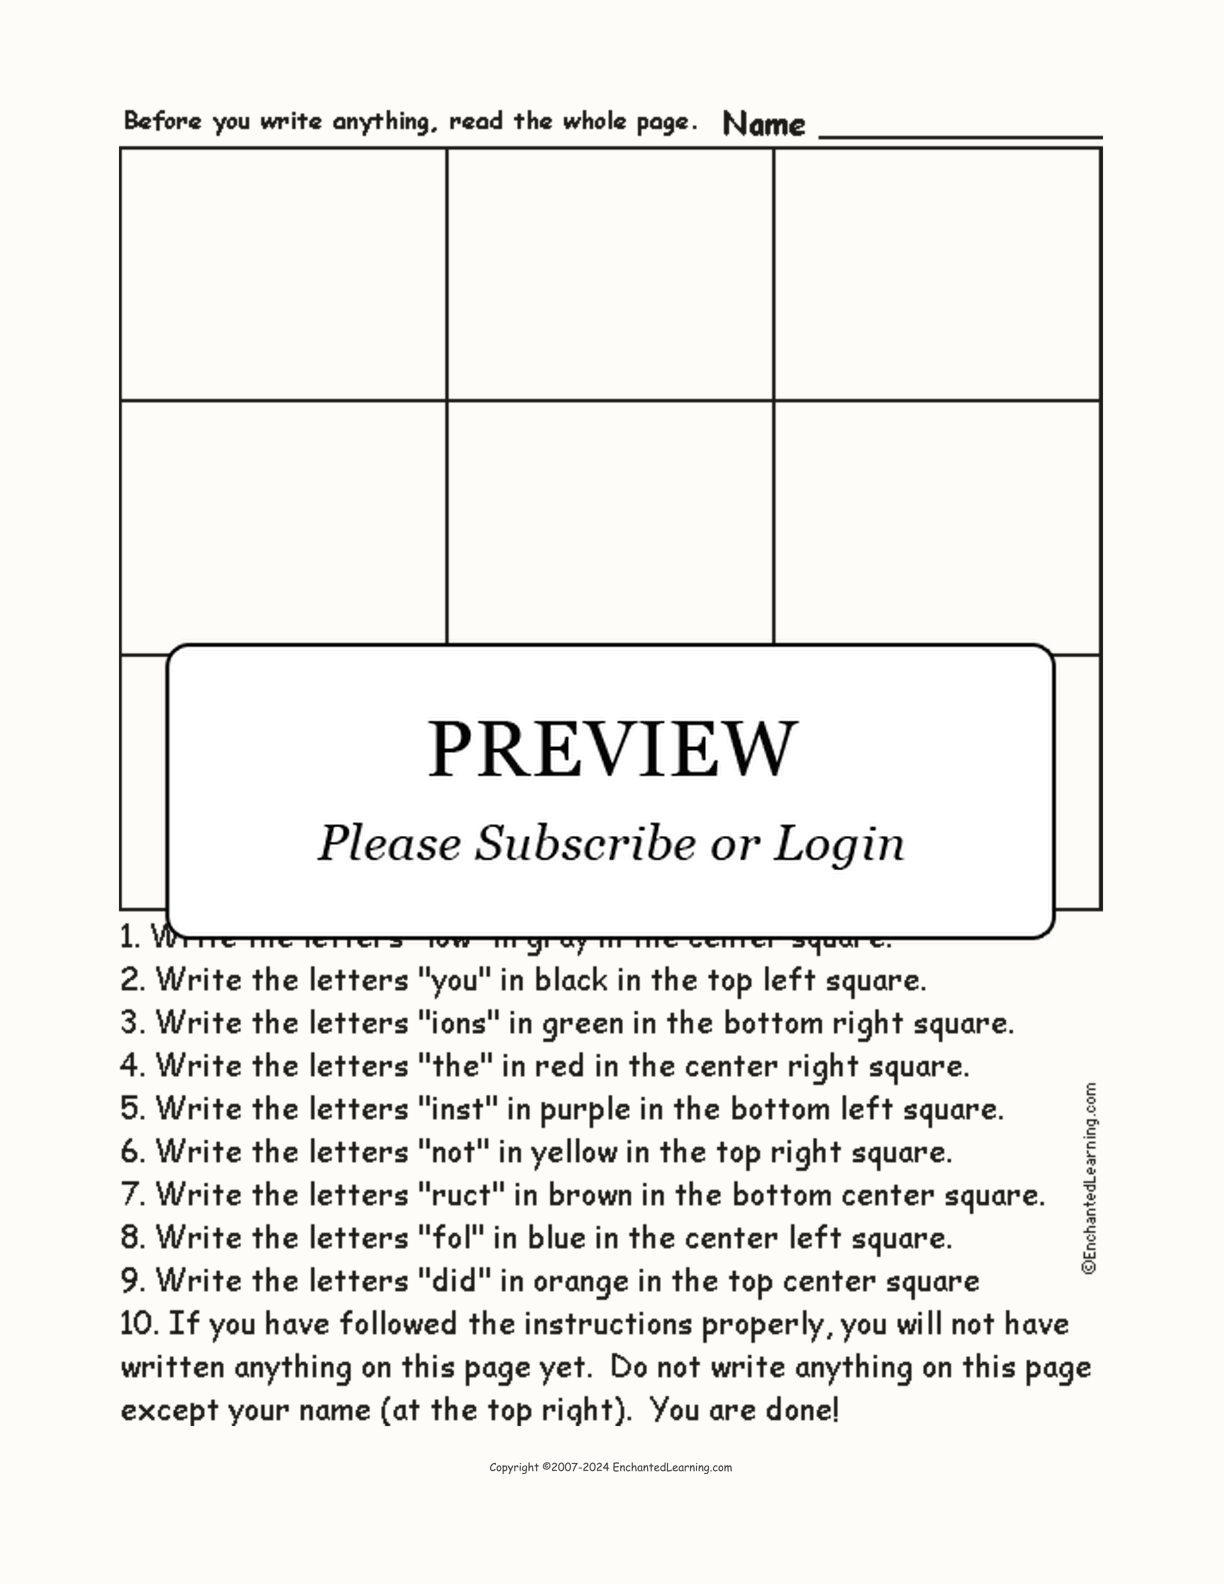 April Fool's Day - Follow the Instructions interactive worksheet page 1